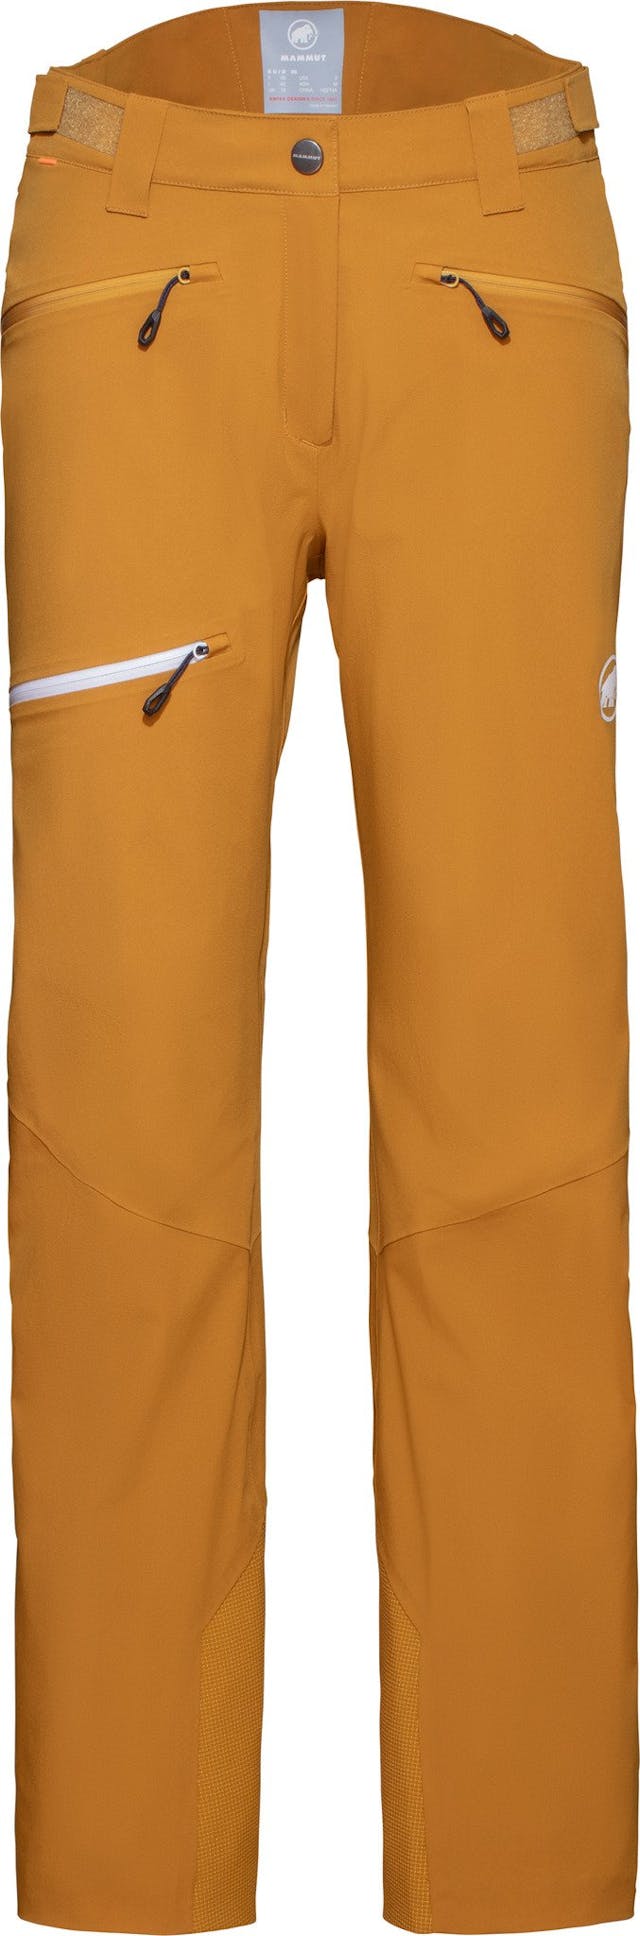 Product image for Stoney HS Pants - Women's